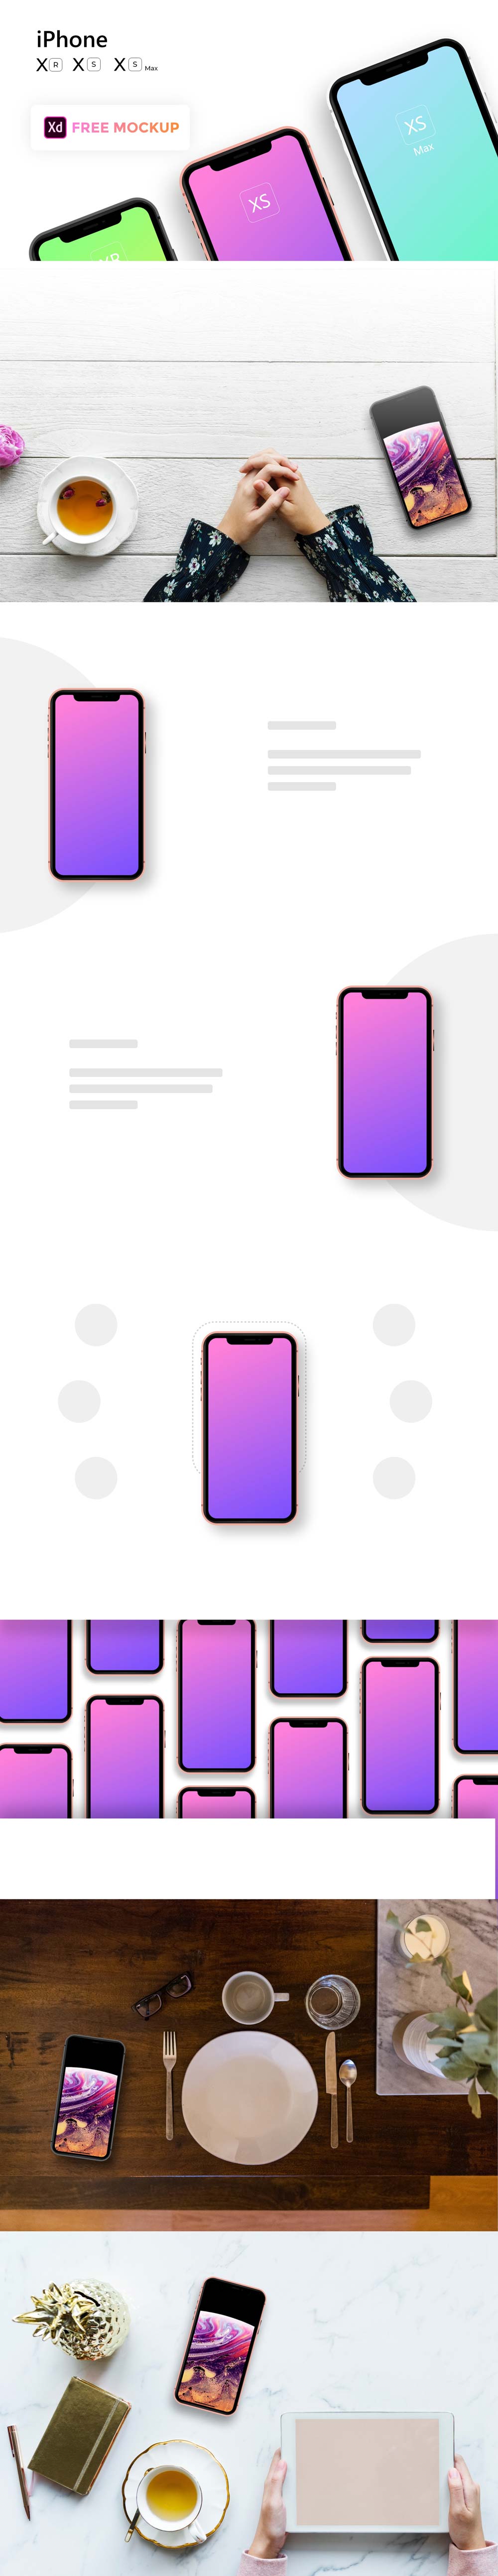 Free Apple iPhone Xs and Xr Mockups